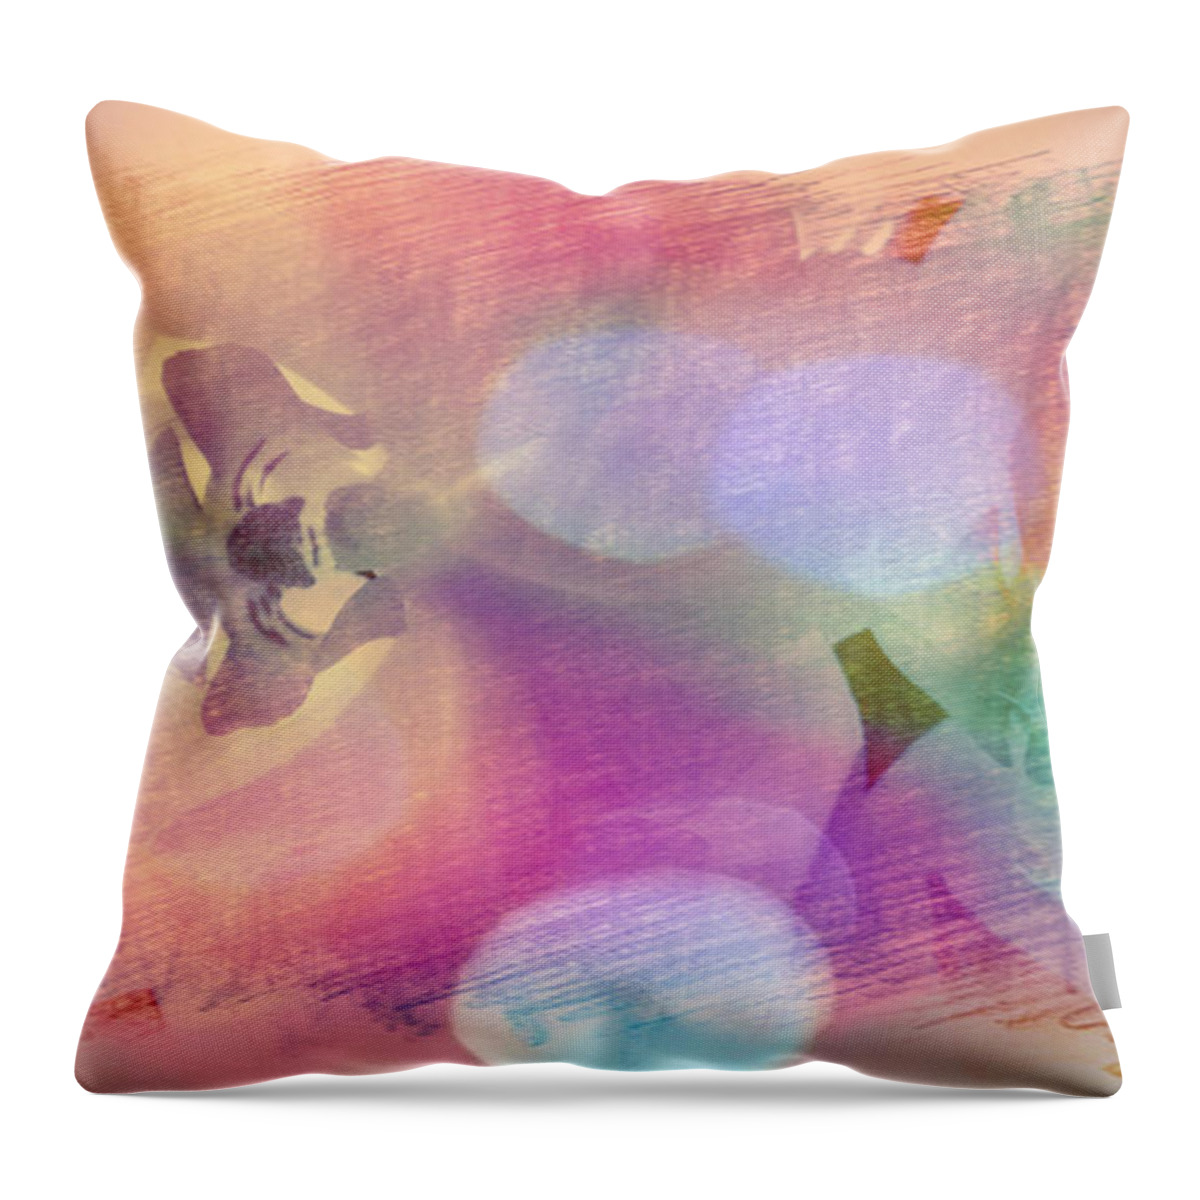 Floral Throw Pillow featuring the painting The Magic Petal by Xueyin Chen